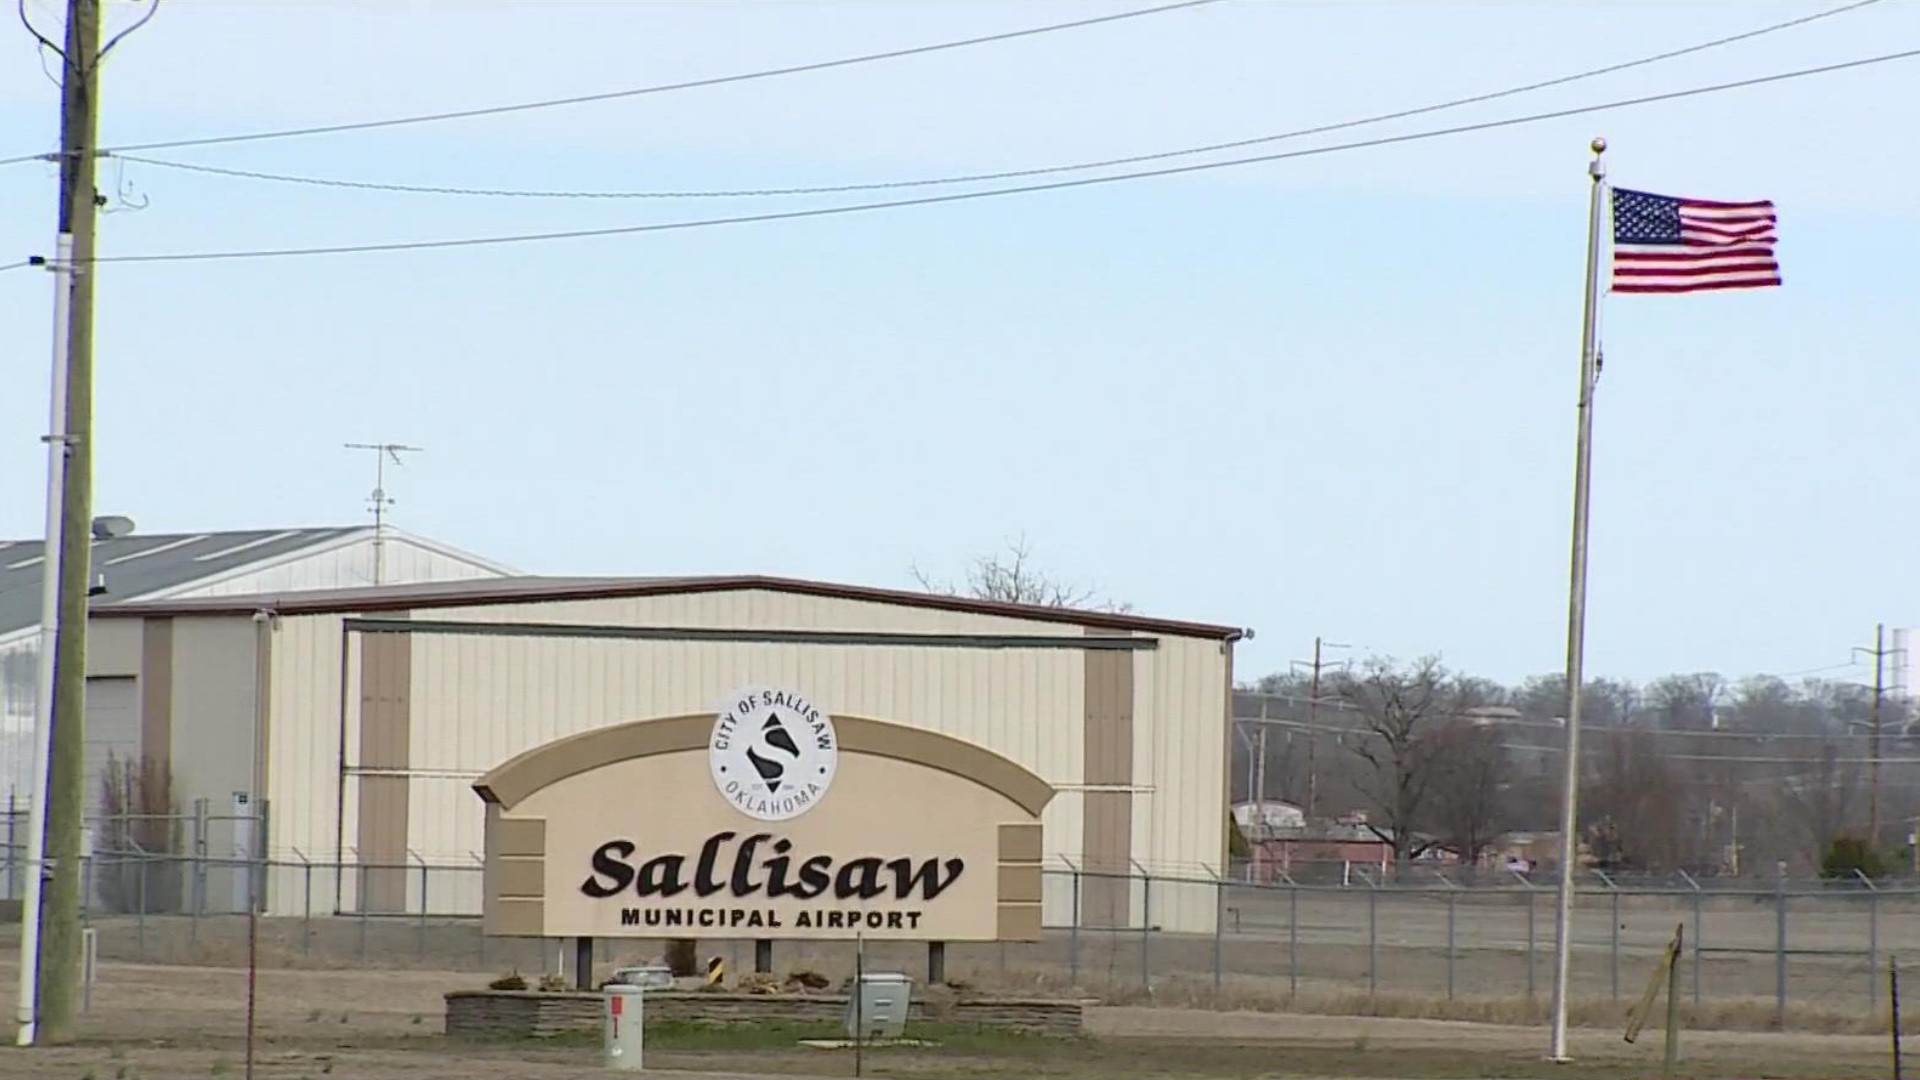 According to the Sallisaw Police Department, a woman died after an unknown issue took place during a solo skydiving jump at the Adventure Skydive Center.